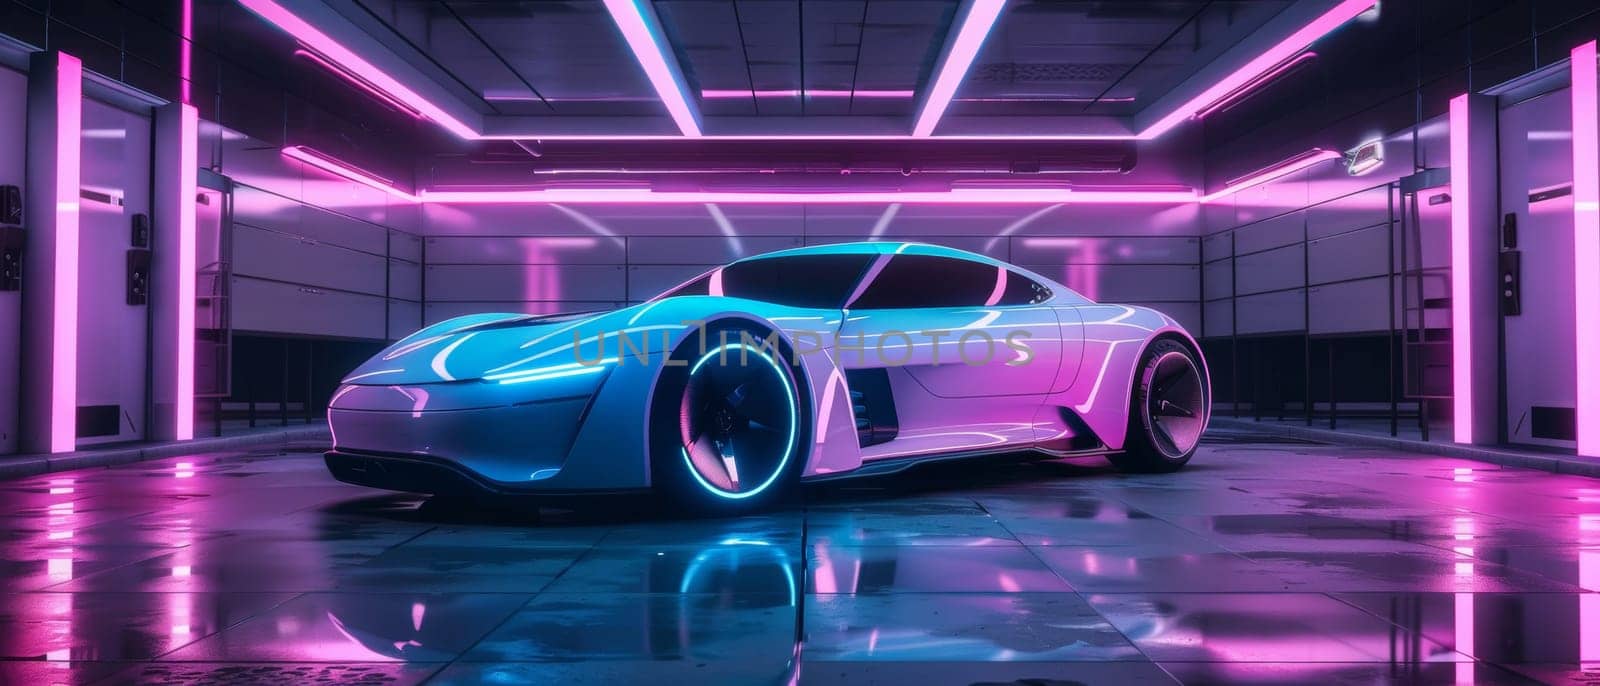 This electric car boasts a futuristic silhouette lit by cyber neon accents, casting reflections on the glossy floor. Its design merges efficiency with a cyber aesthetic, hinting at the next era. by sfinks